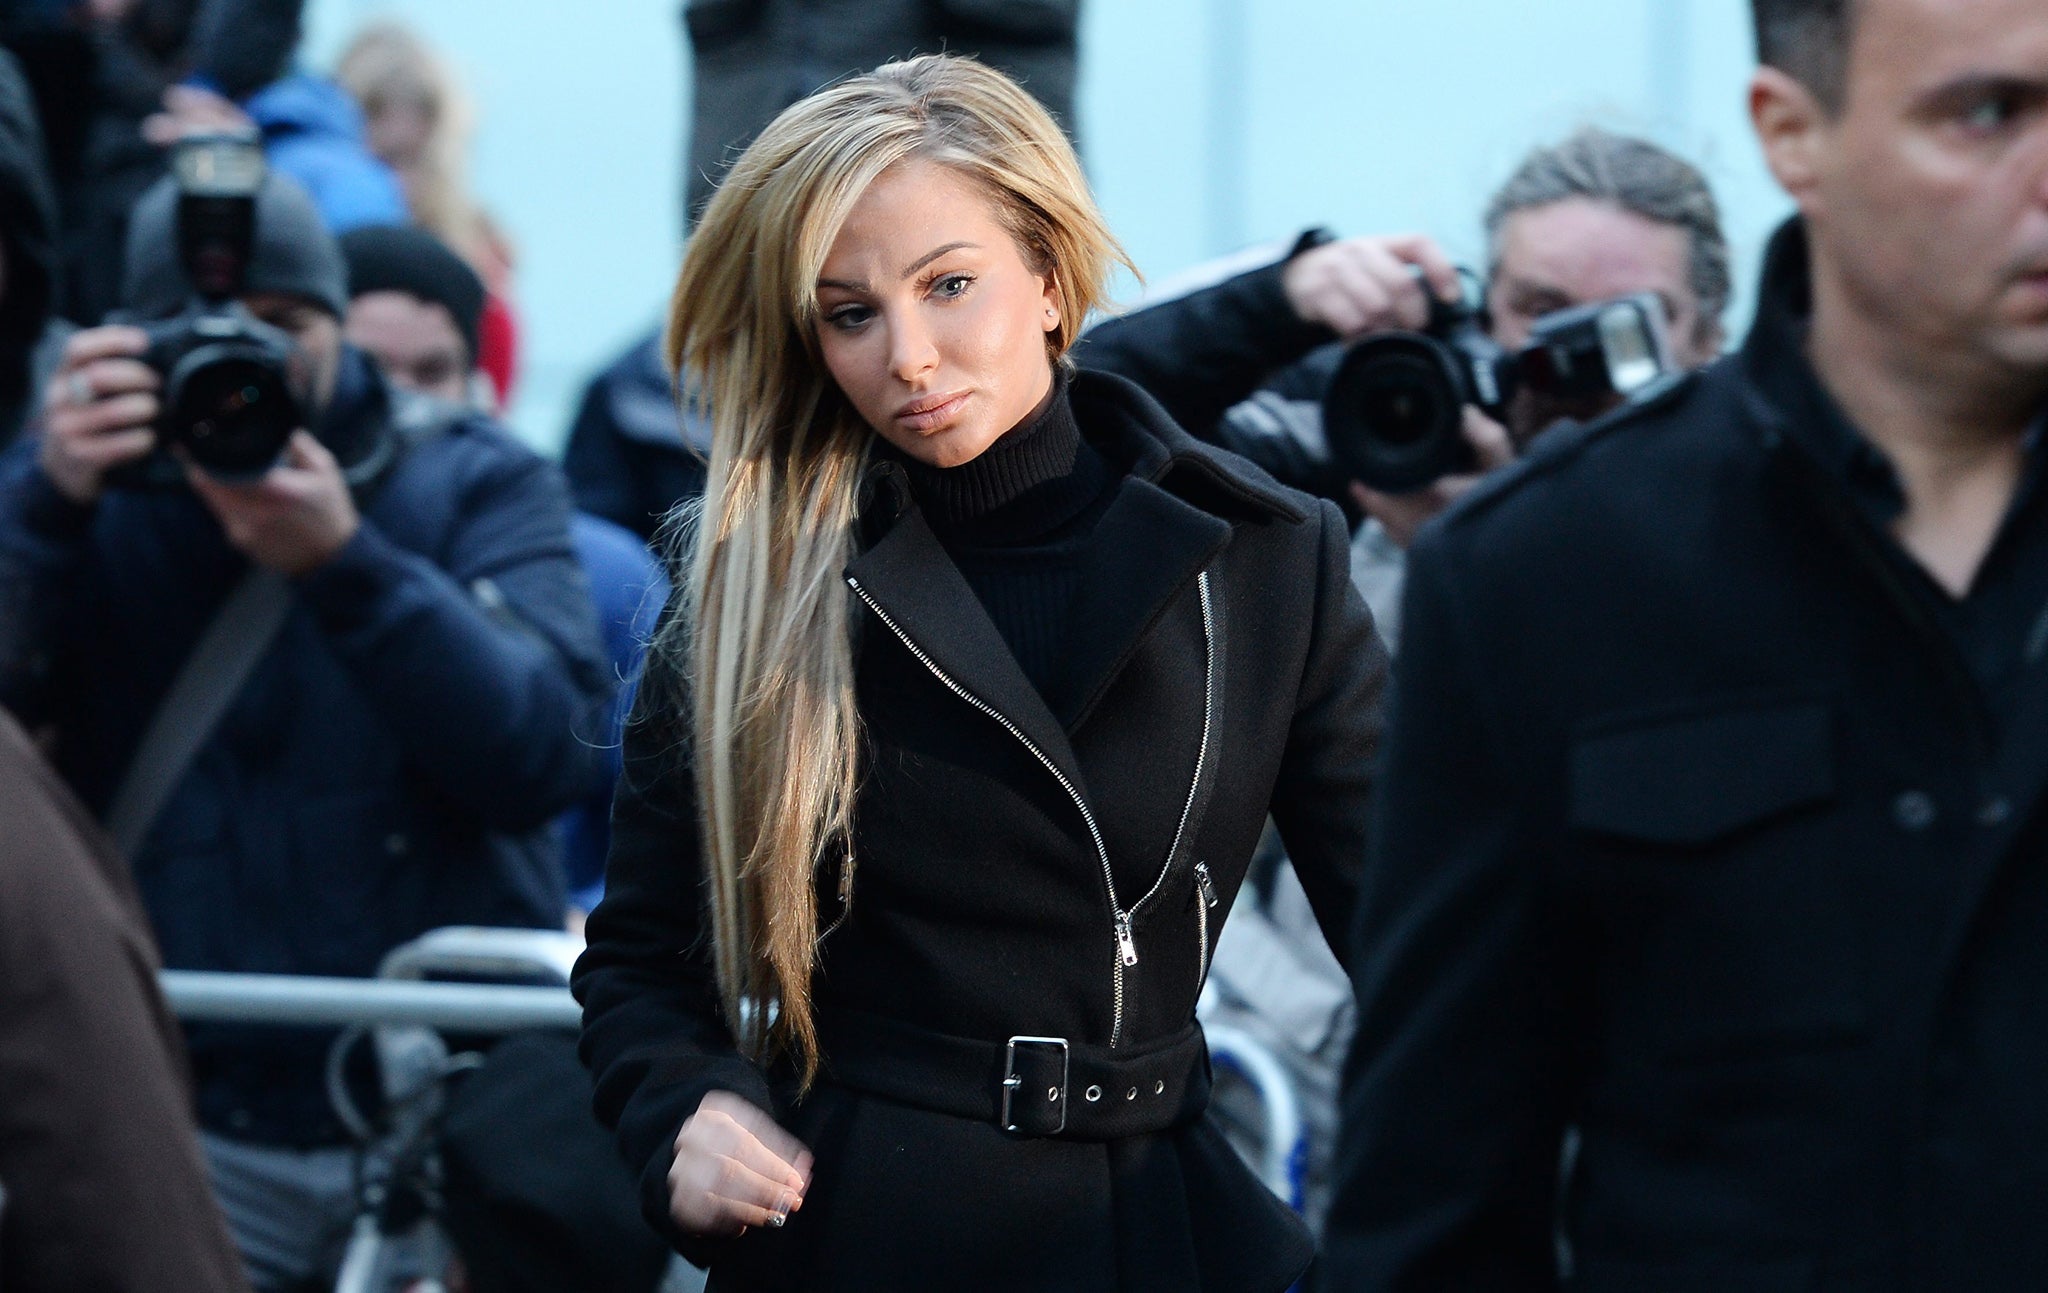 Tulisa Contostavlos drugs court latest: Former X Factor judge makes first crown court appearance